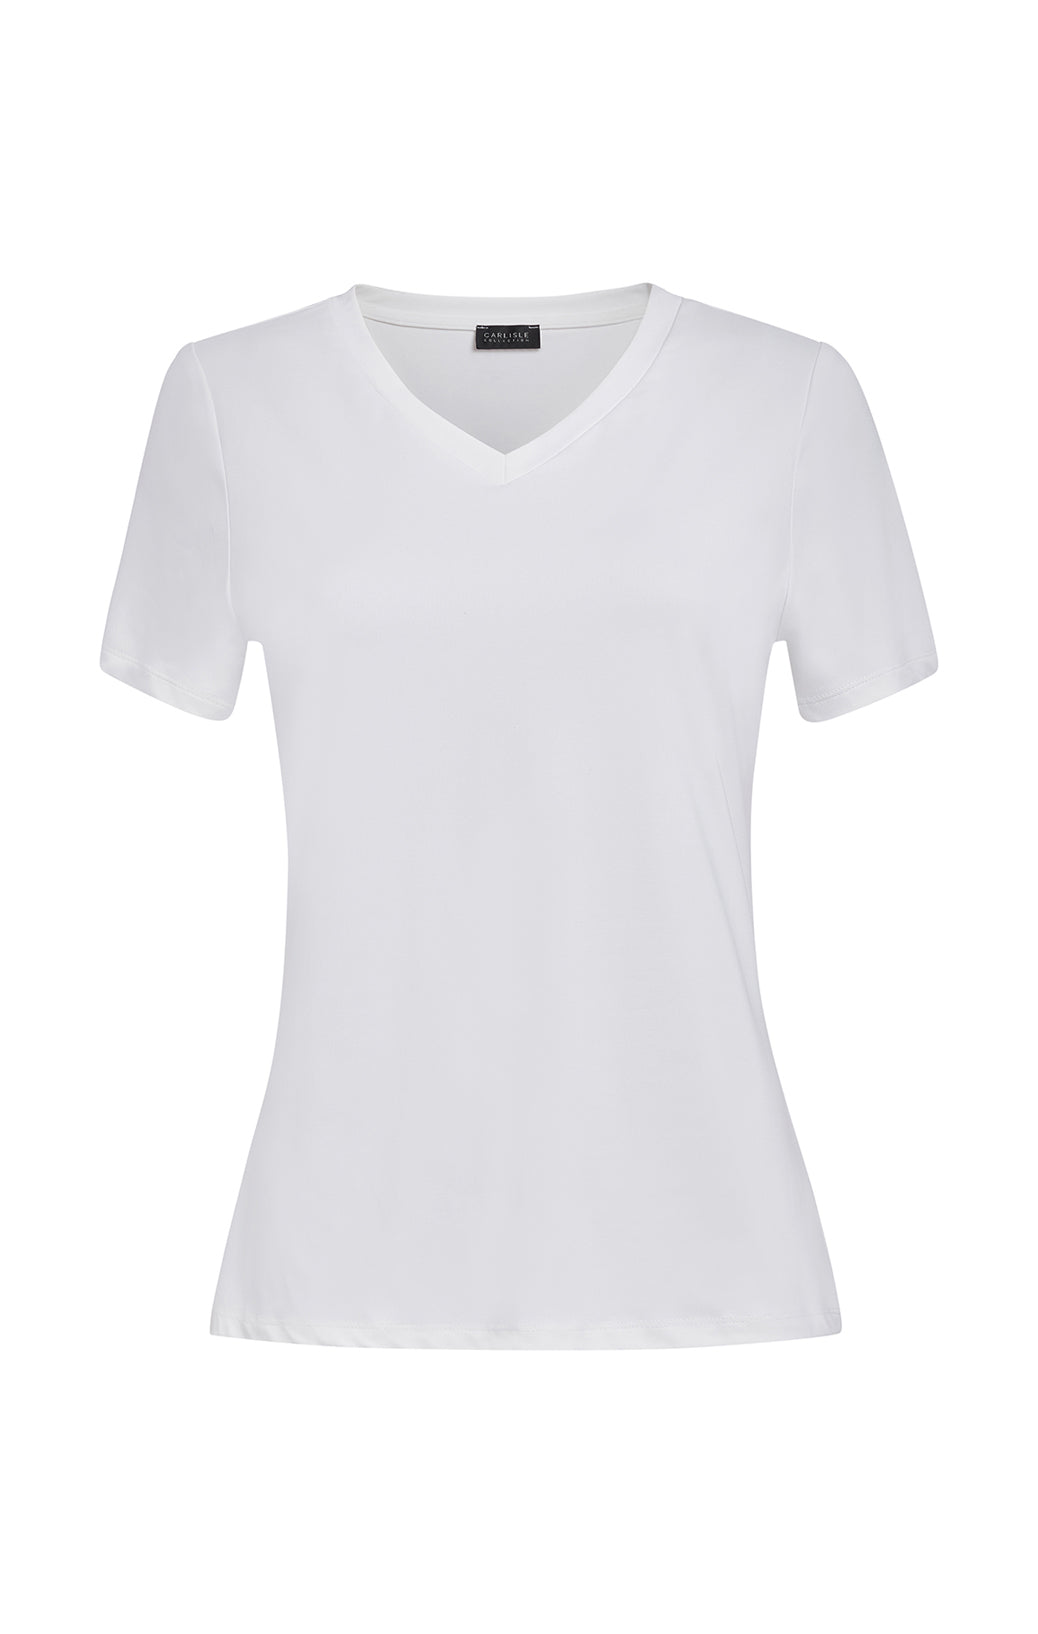 Balance-Wht - Organic Cotton Reversible Knit Top With Cami - Product Image